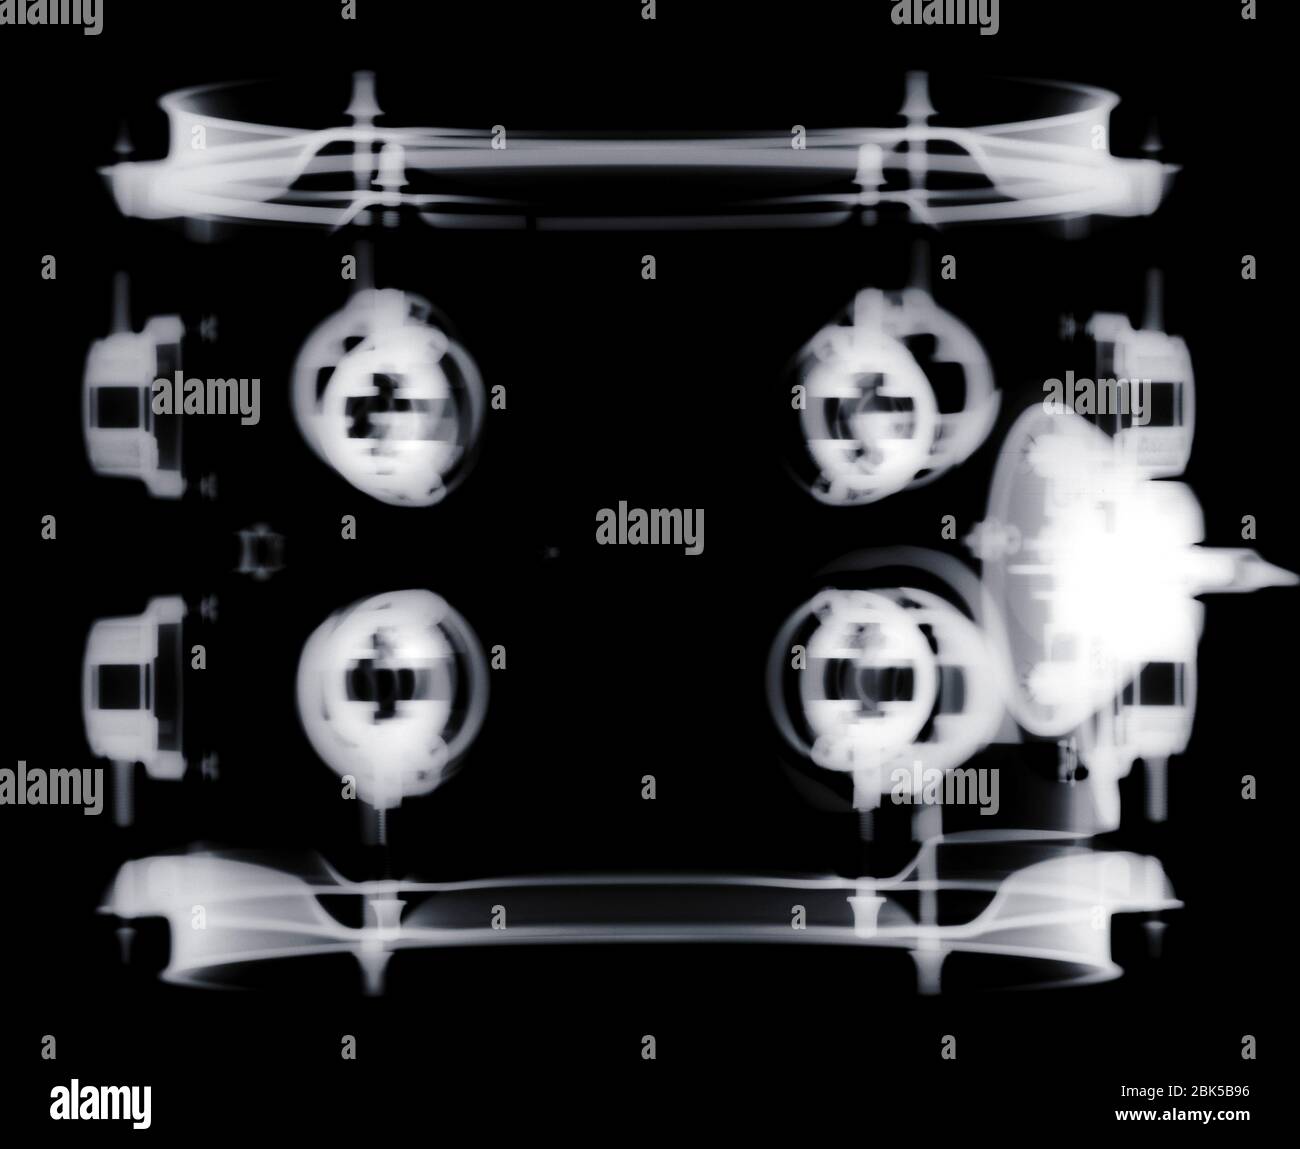 Snare drum, X-ray. Stock Photo